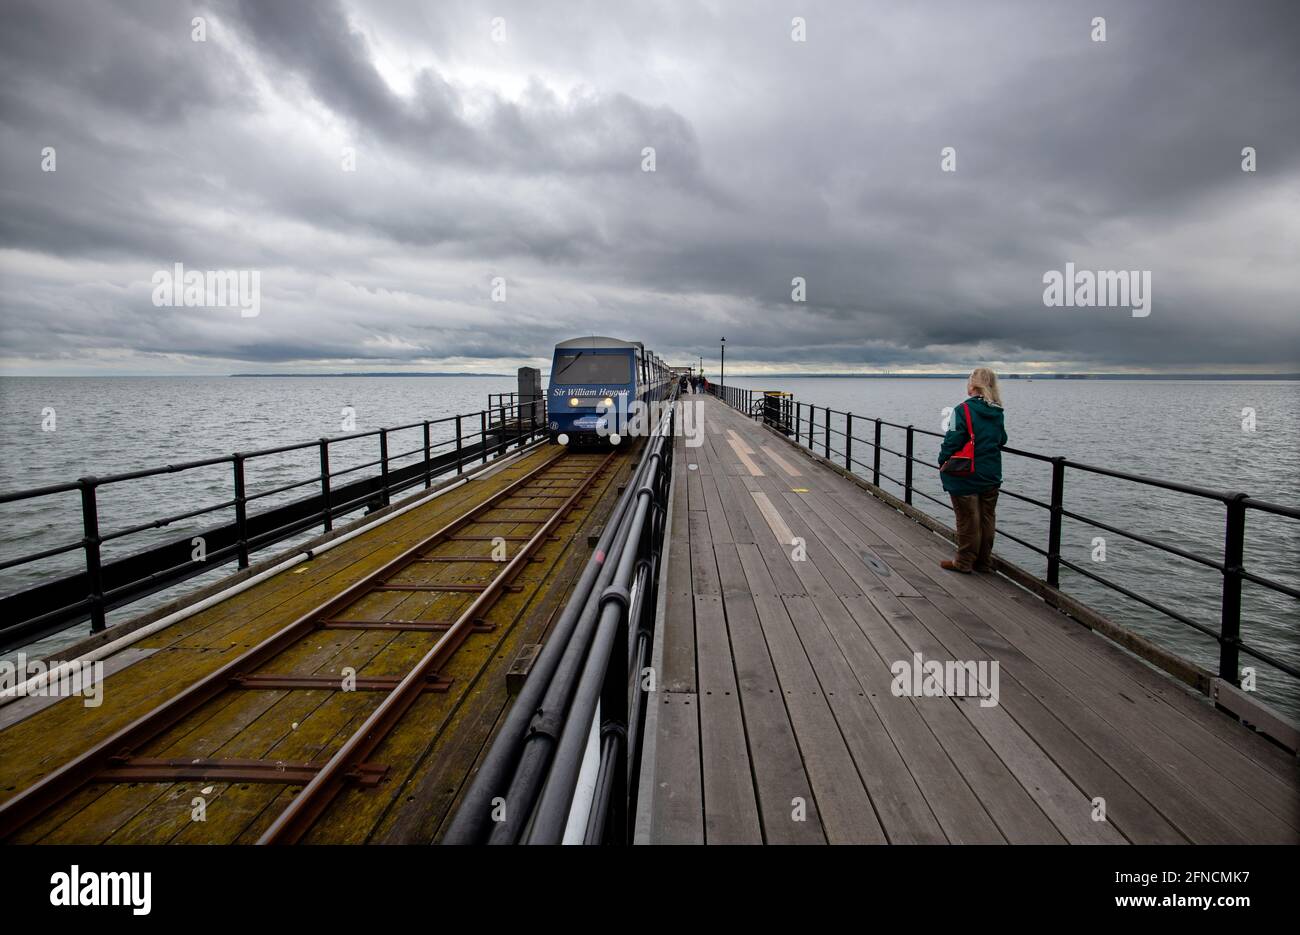 Southend on Sea Essex England UK 15 May 2021 The Sir William Heygate train on the pier, named after former Lord Mayor of London. He also led the publi Stock Photo